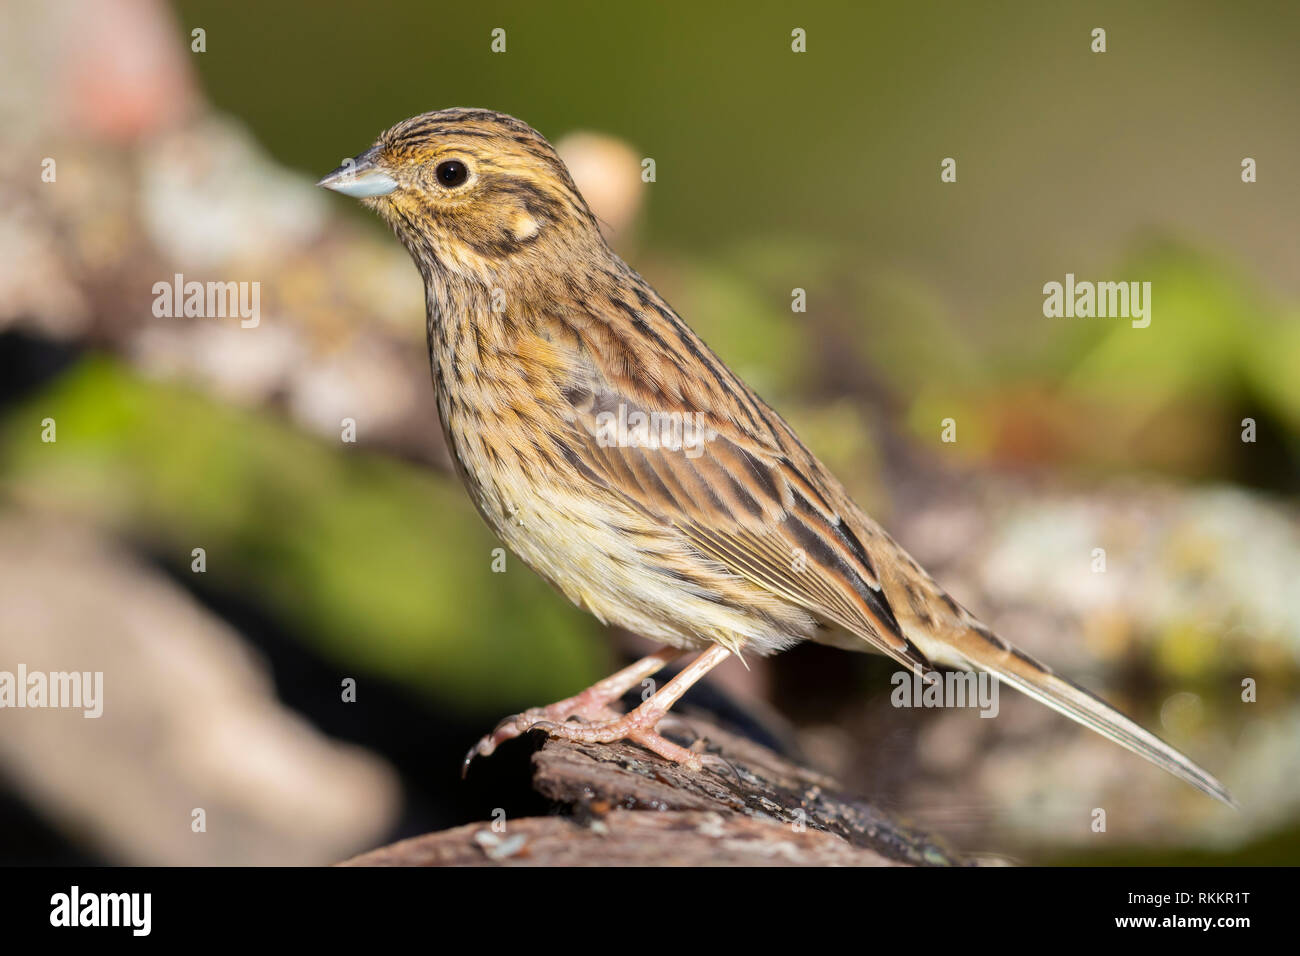 Cirl Bunting (Emberiza cirlus), side view of an adult female perched on a piece of bark Stock Photo